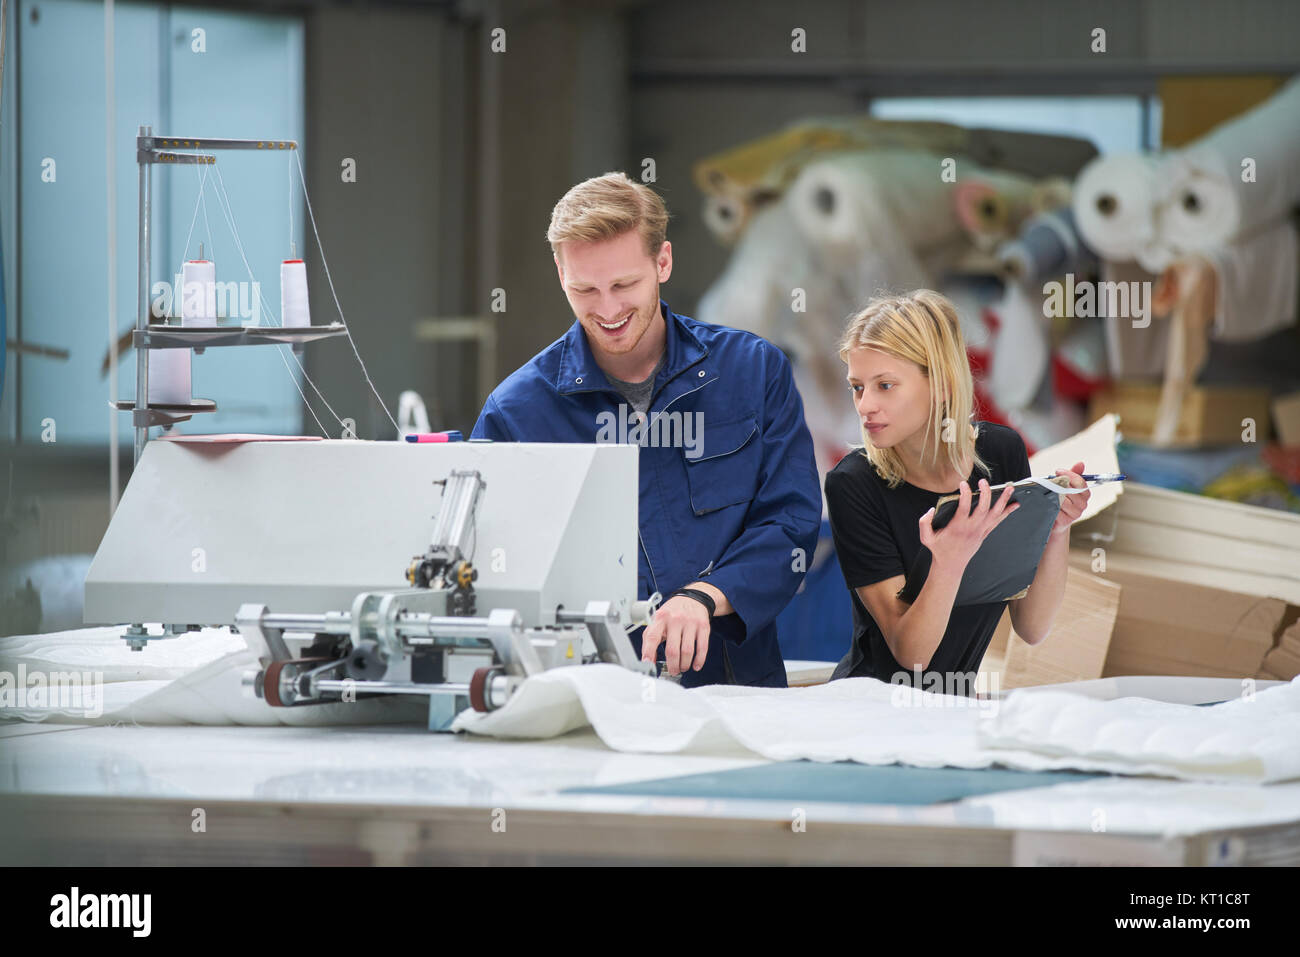 Seamstress is new assigned to a machine in a textile factory, the foreman explains something Stock Photo